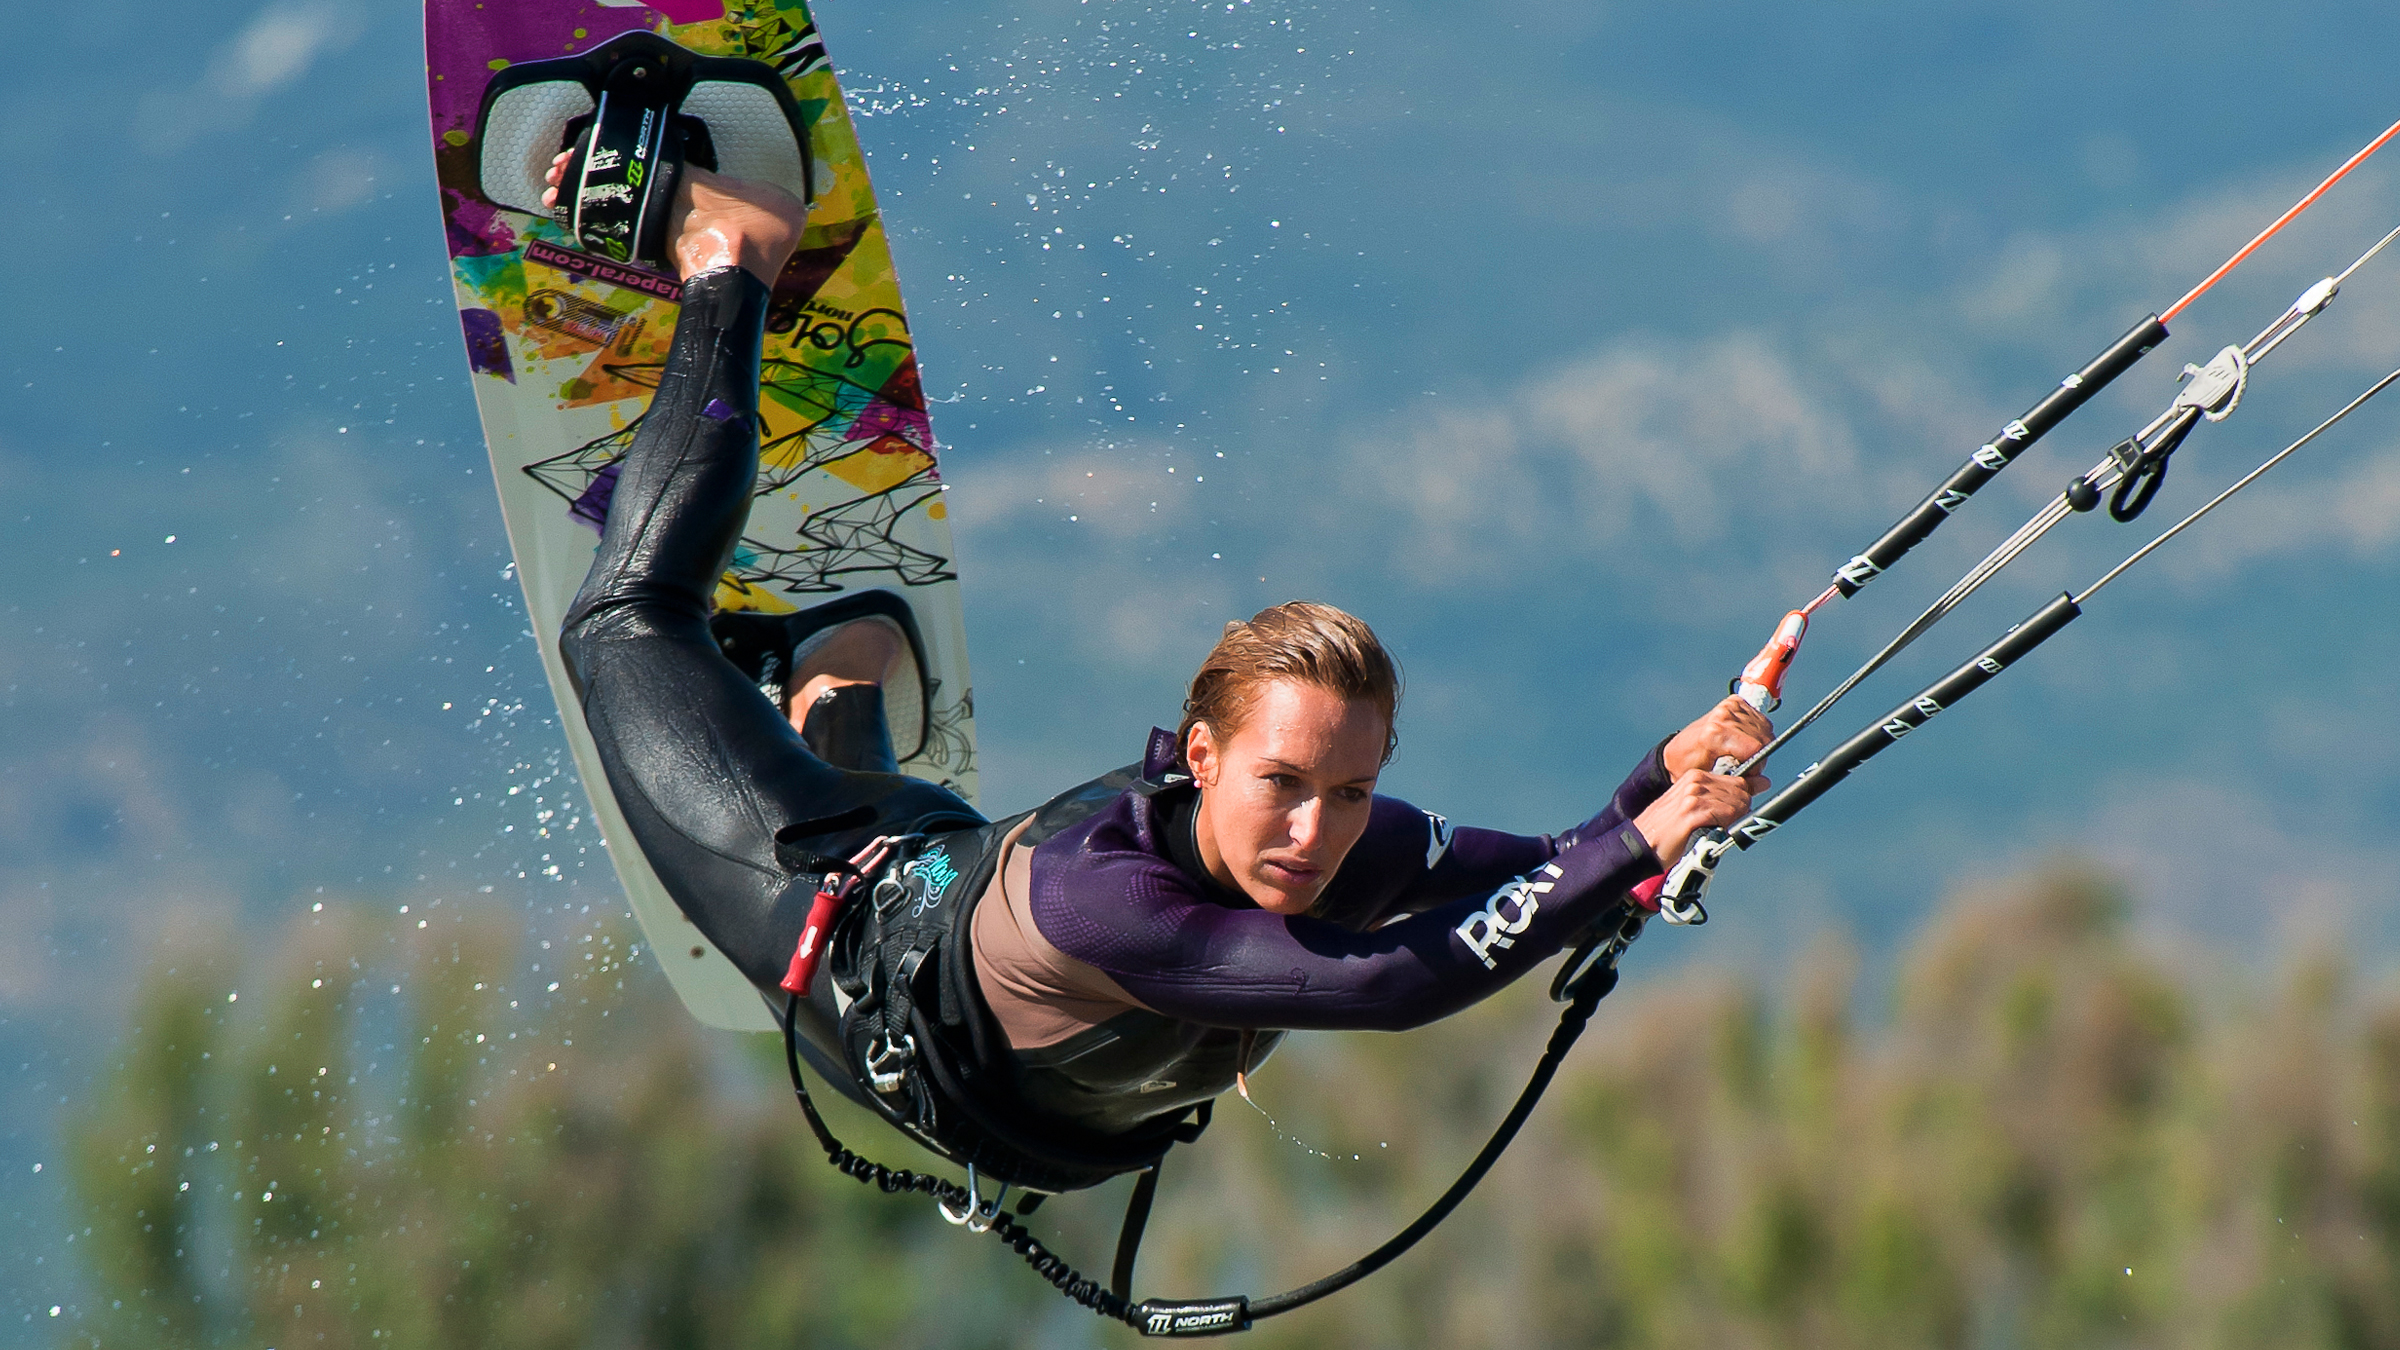 kitesurf wallpaper image - Angela Peral raily into town - in resolution: High Definition - HD 16:9 2400 X 1350